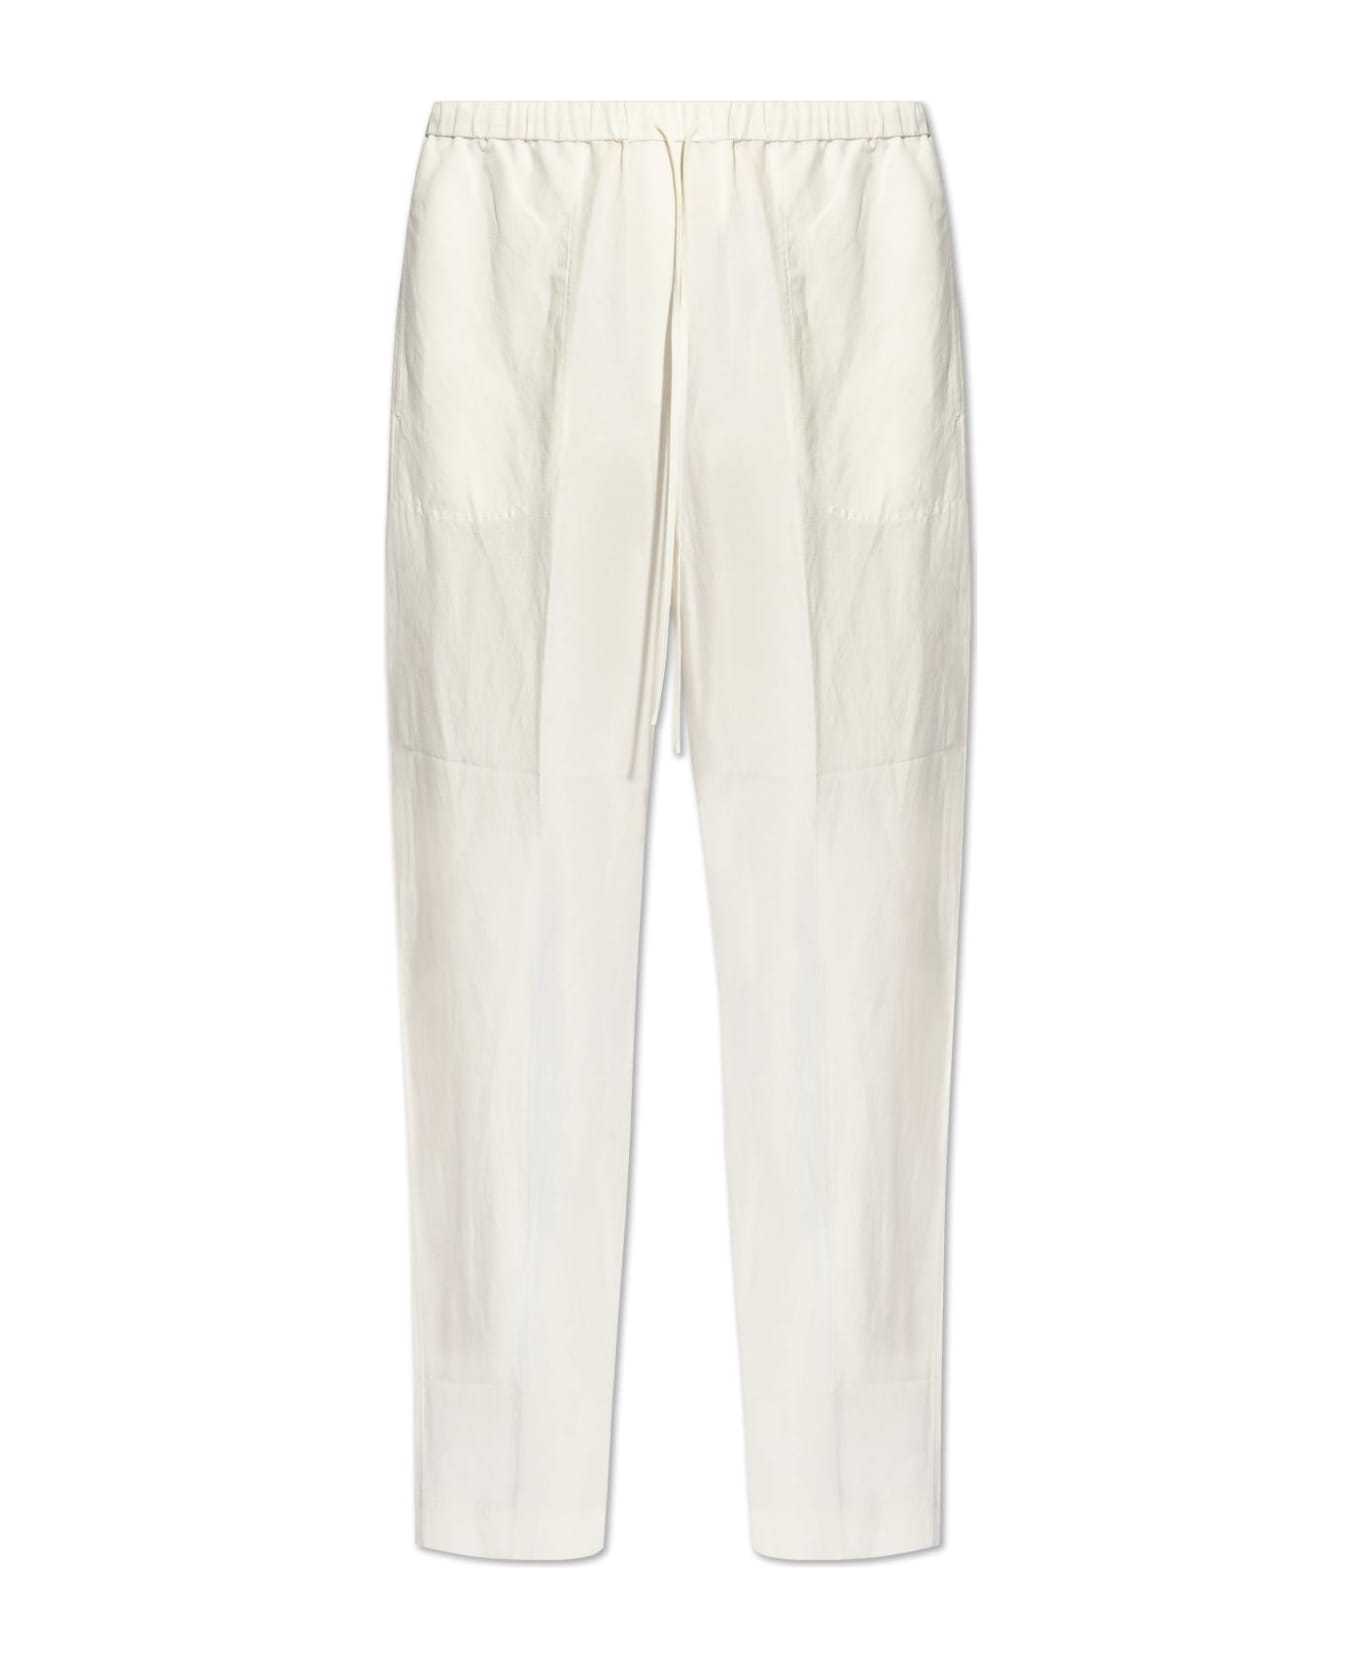 Totême Toteme Trousers With Pockets - White